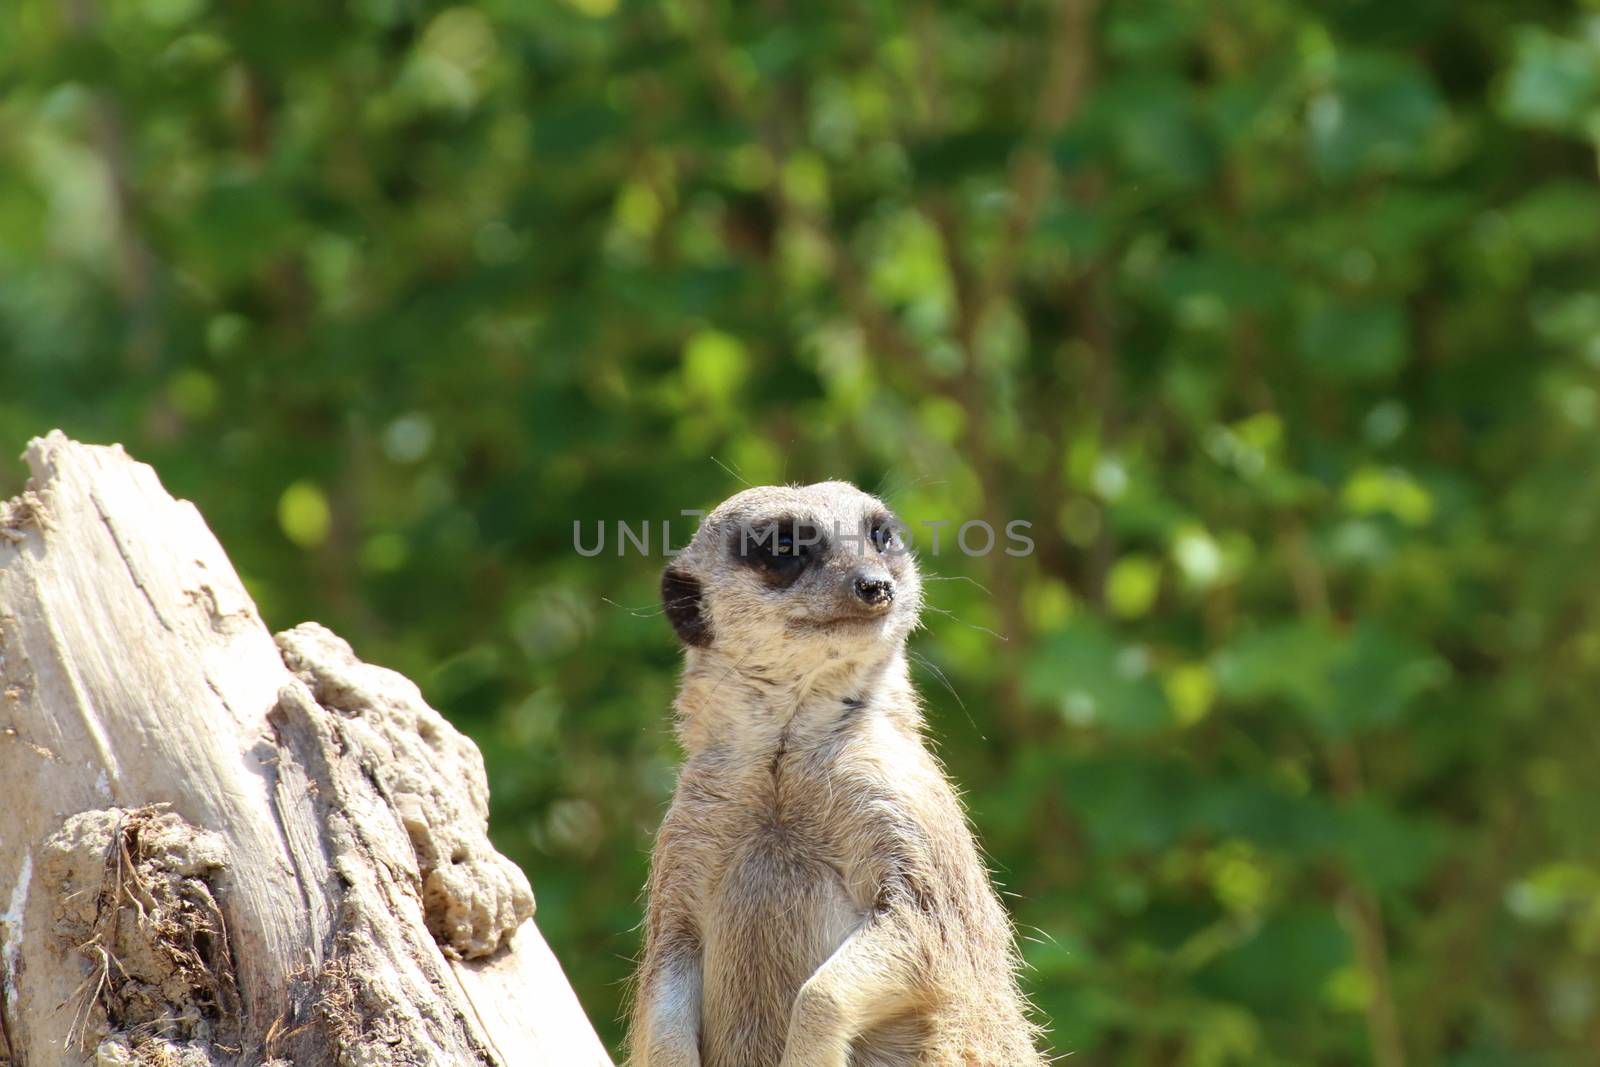 a meerkat remain alert to detect any dangers by riccardofe